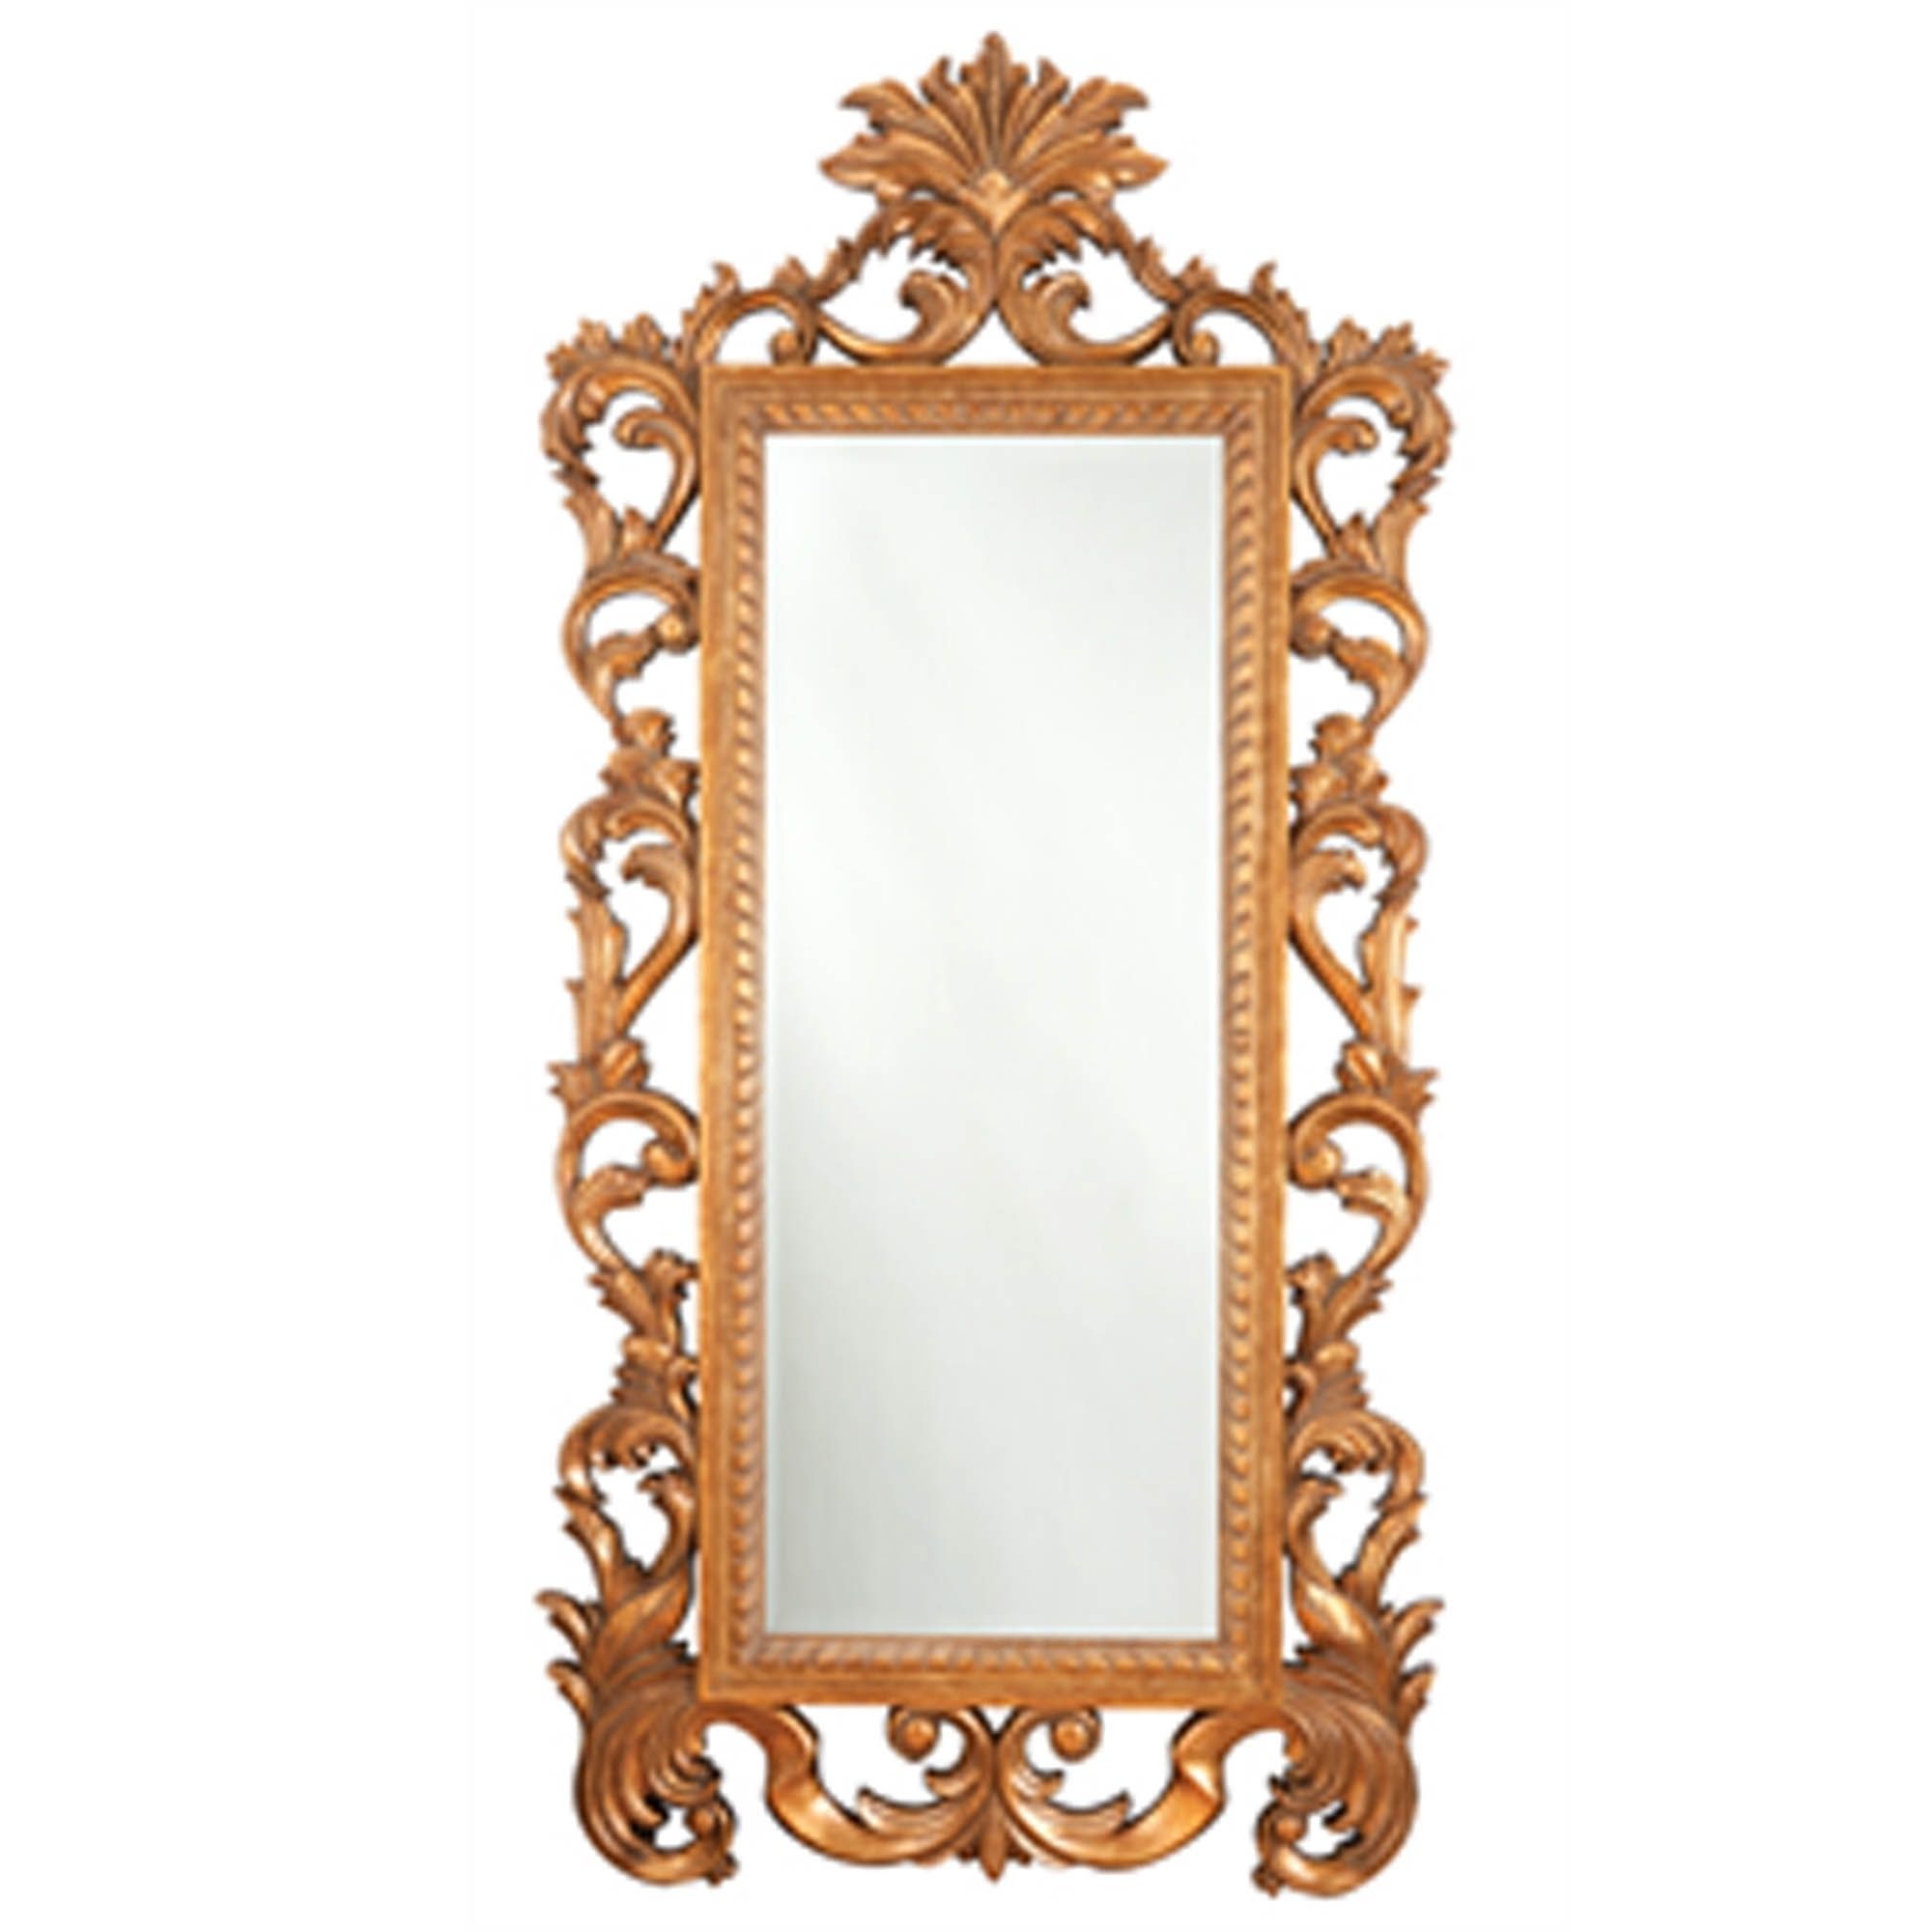 Gold Antique French Style Rectangular Ornate Wall Mirror | Hd365 For Dark Gold Rectangular Wall Mirrors (View 8 of 15)